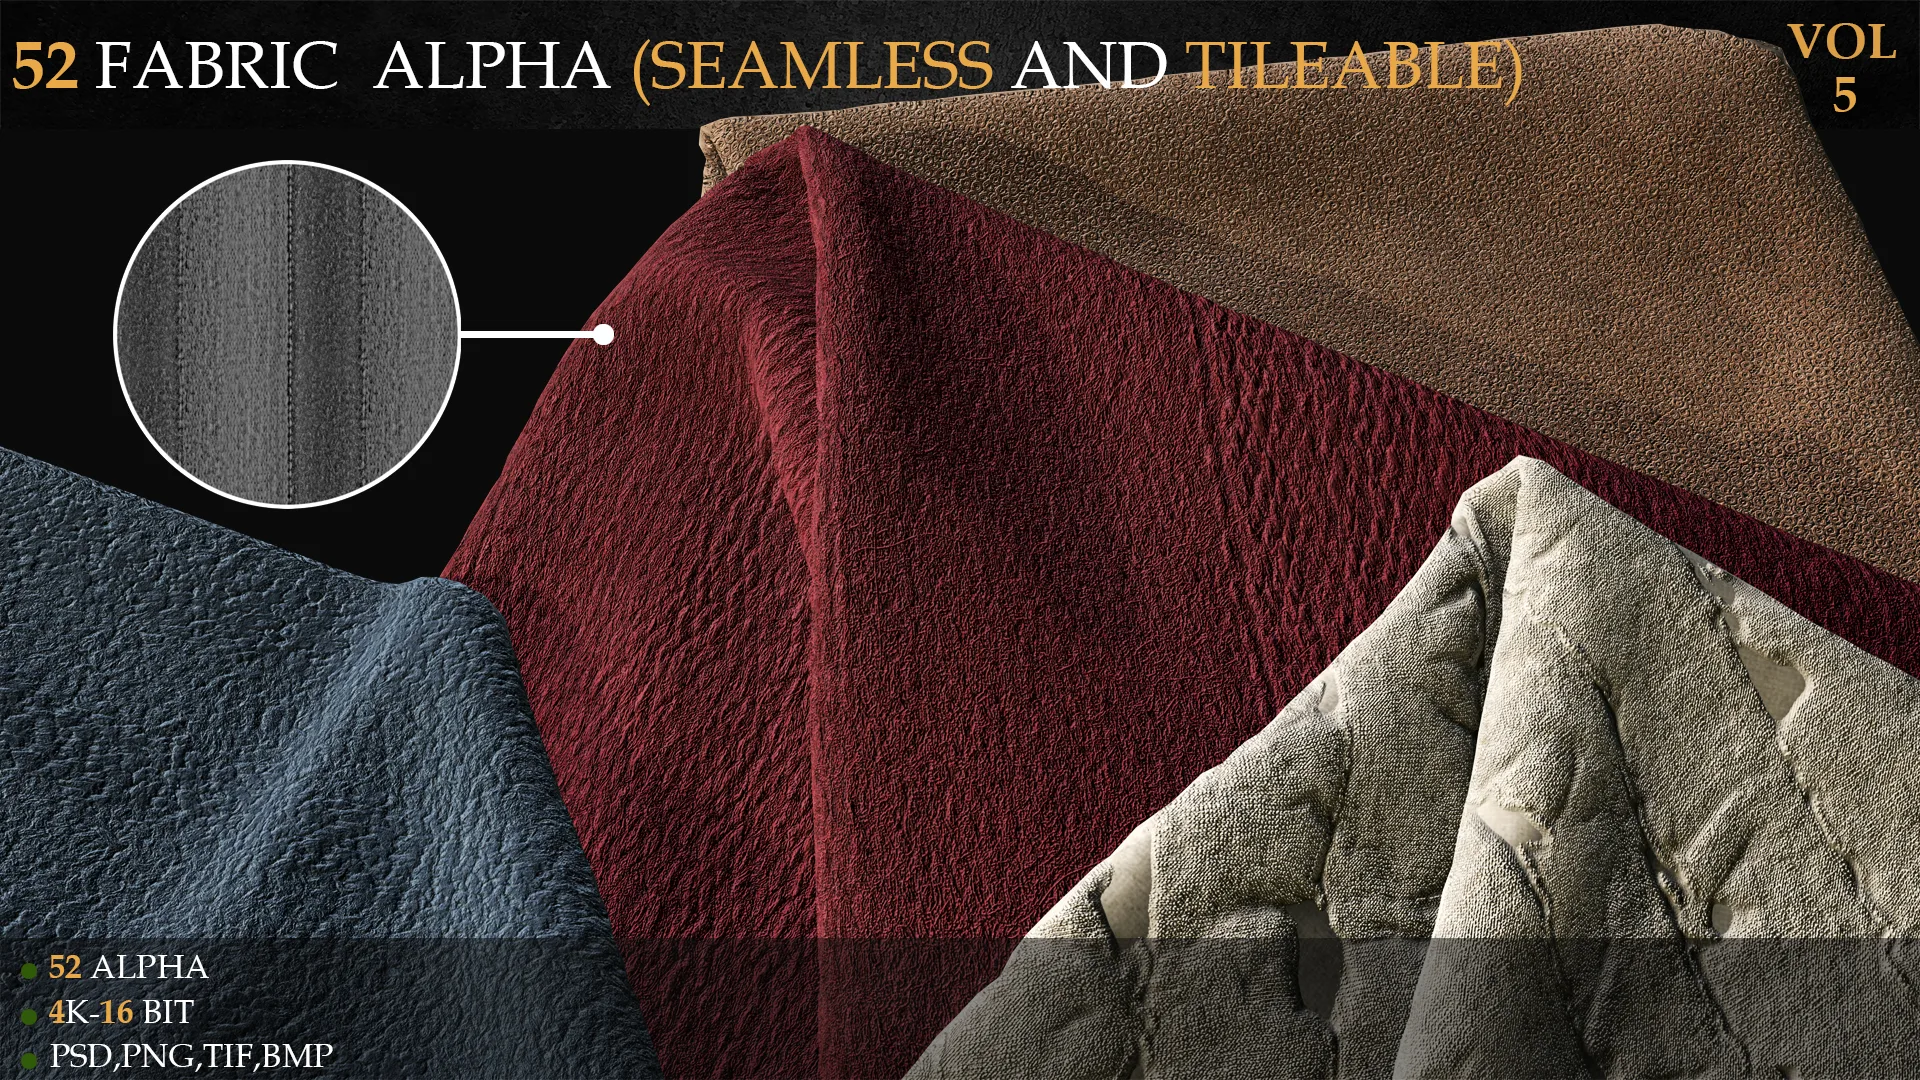 52 FABRIC ALPHA (SEAMLESS AND TILEABLE)-VOL 5